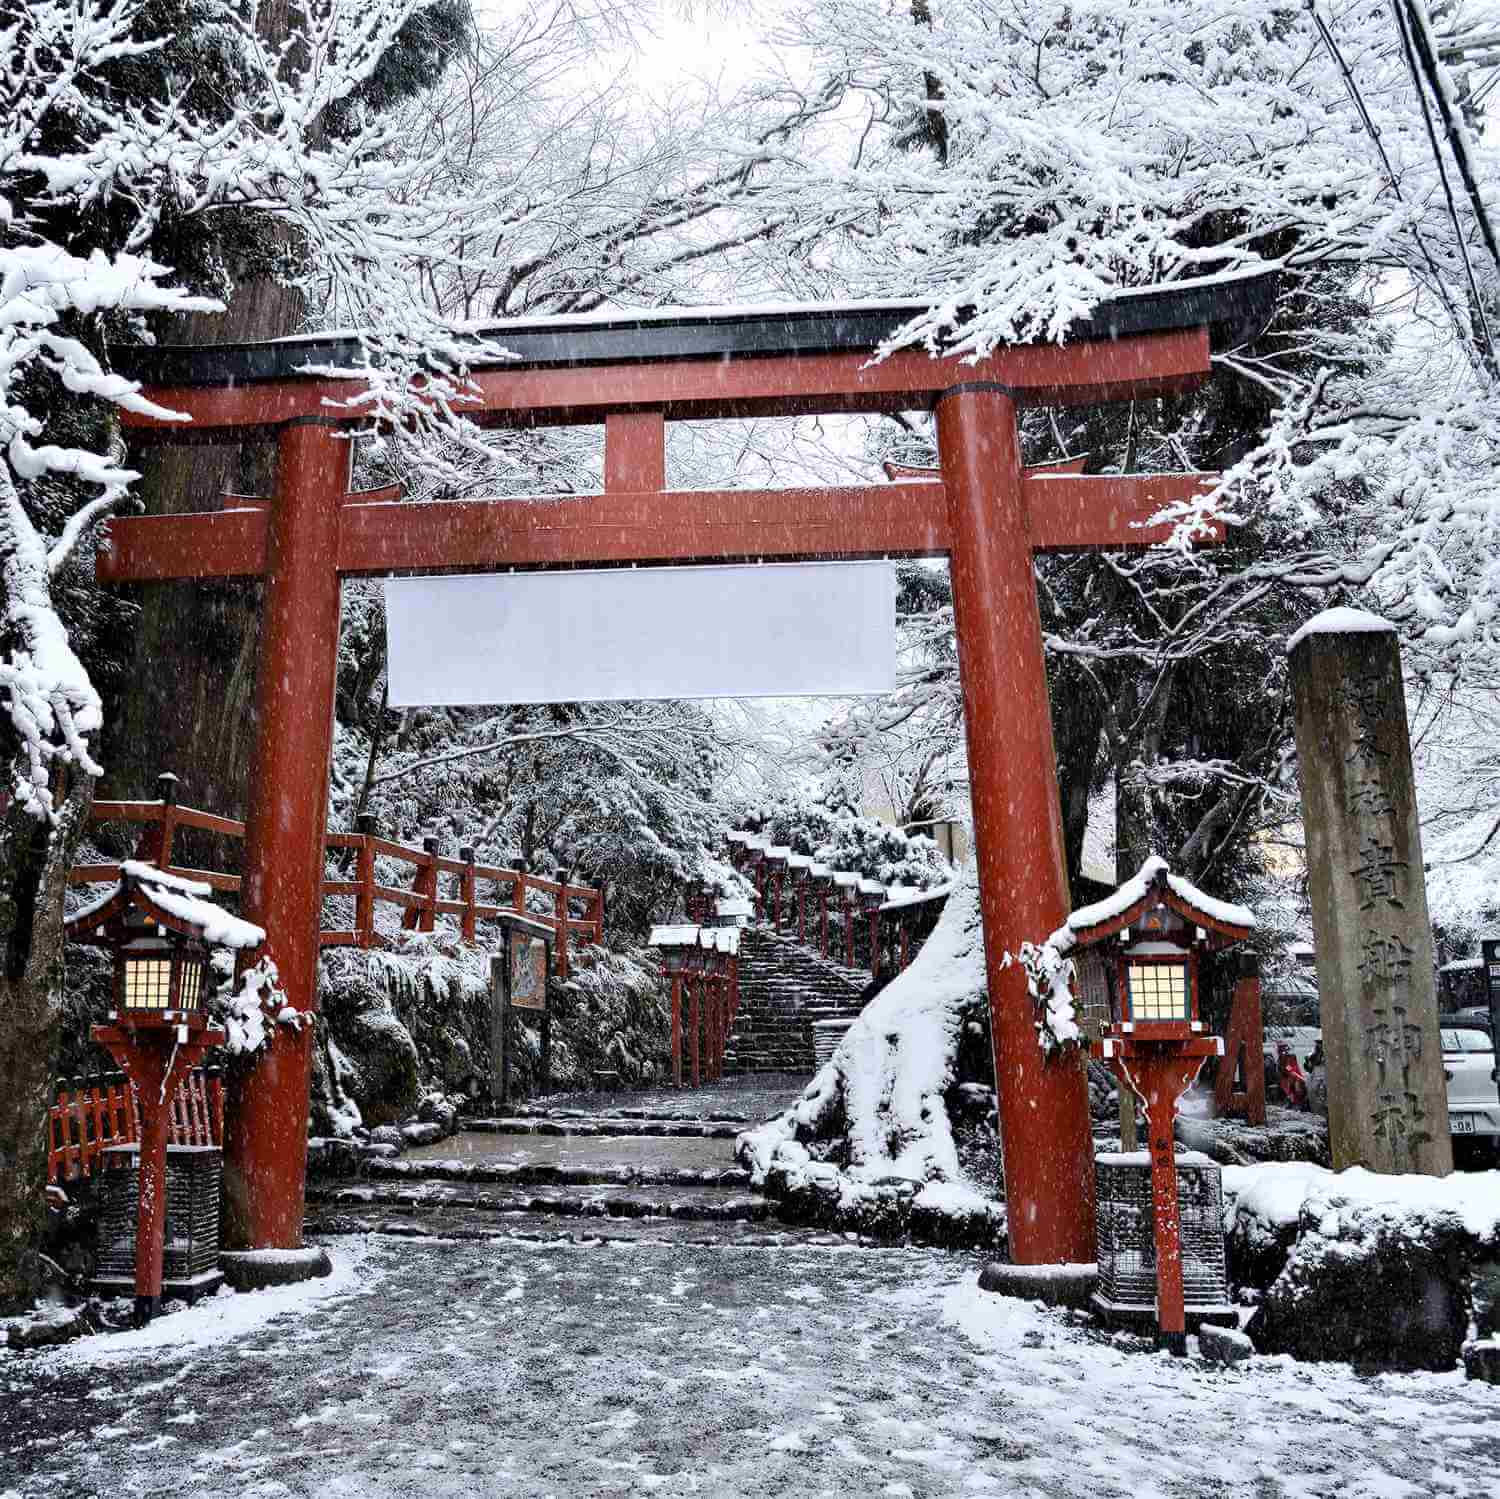 In the northern part of Kyoto, it sometimes snows in the winter =Shutterstock 2